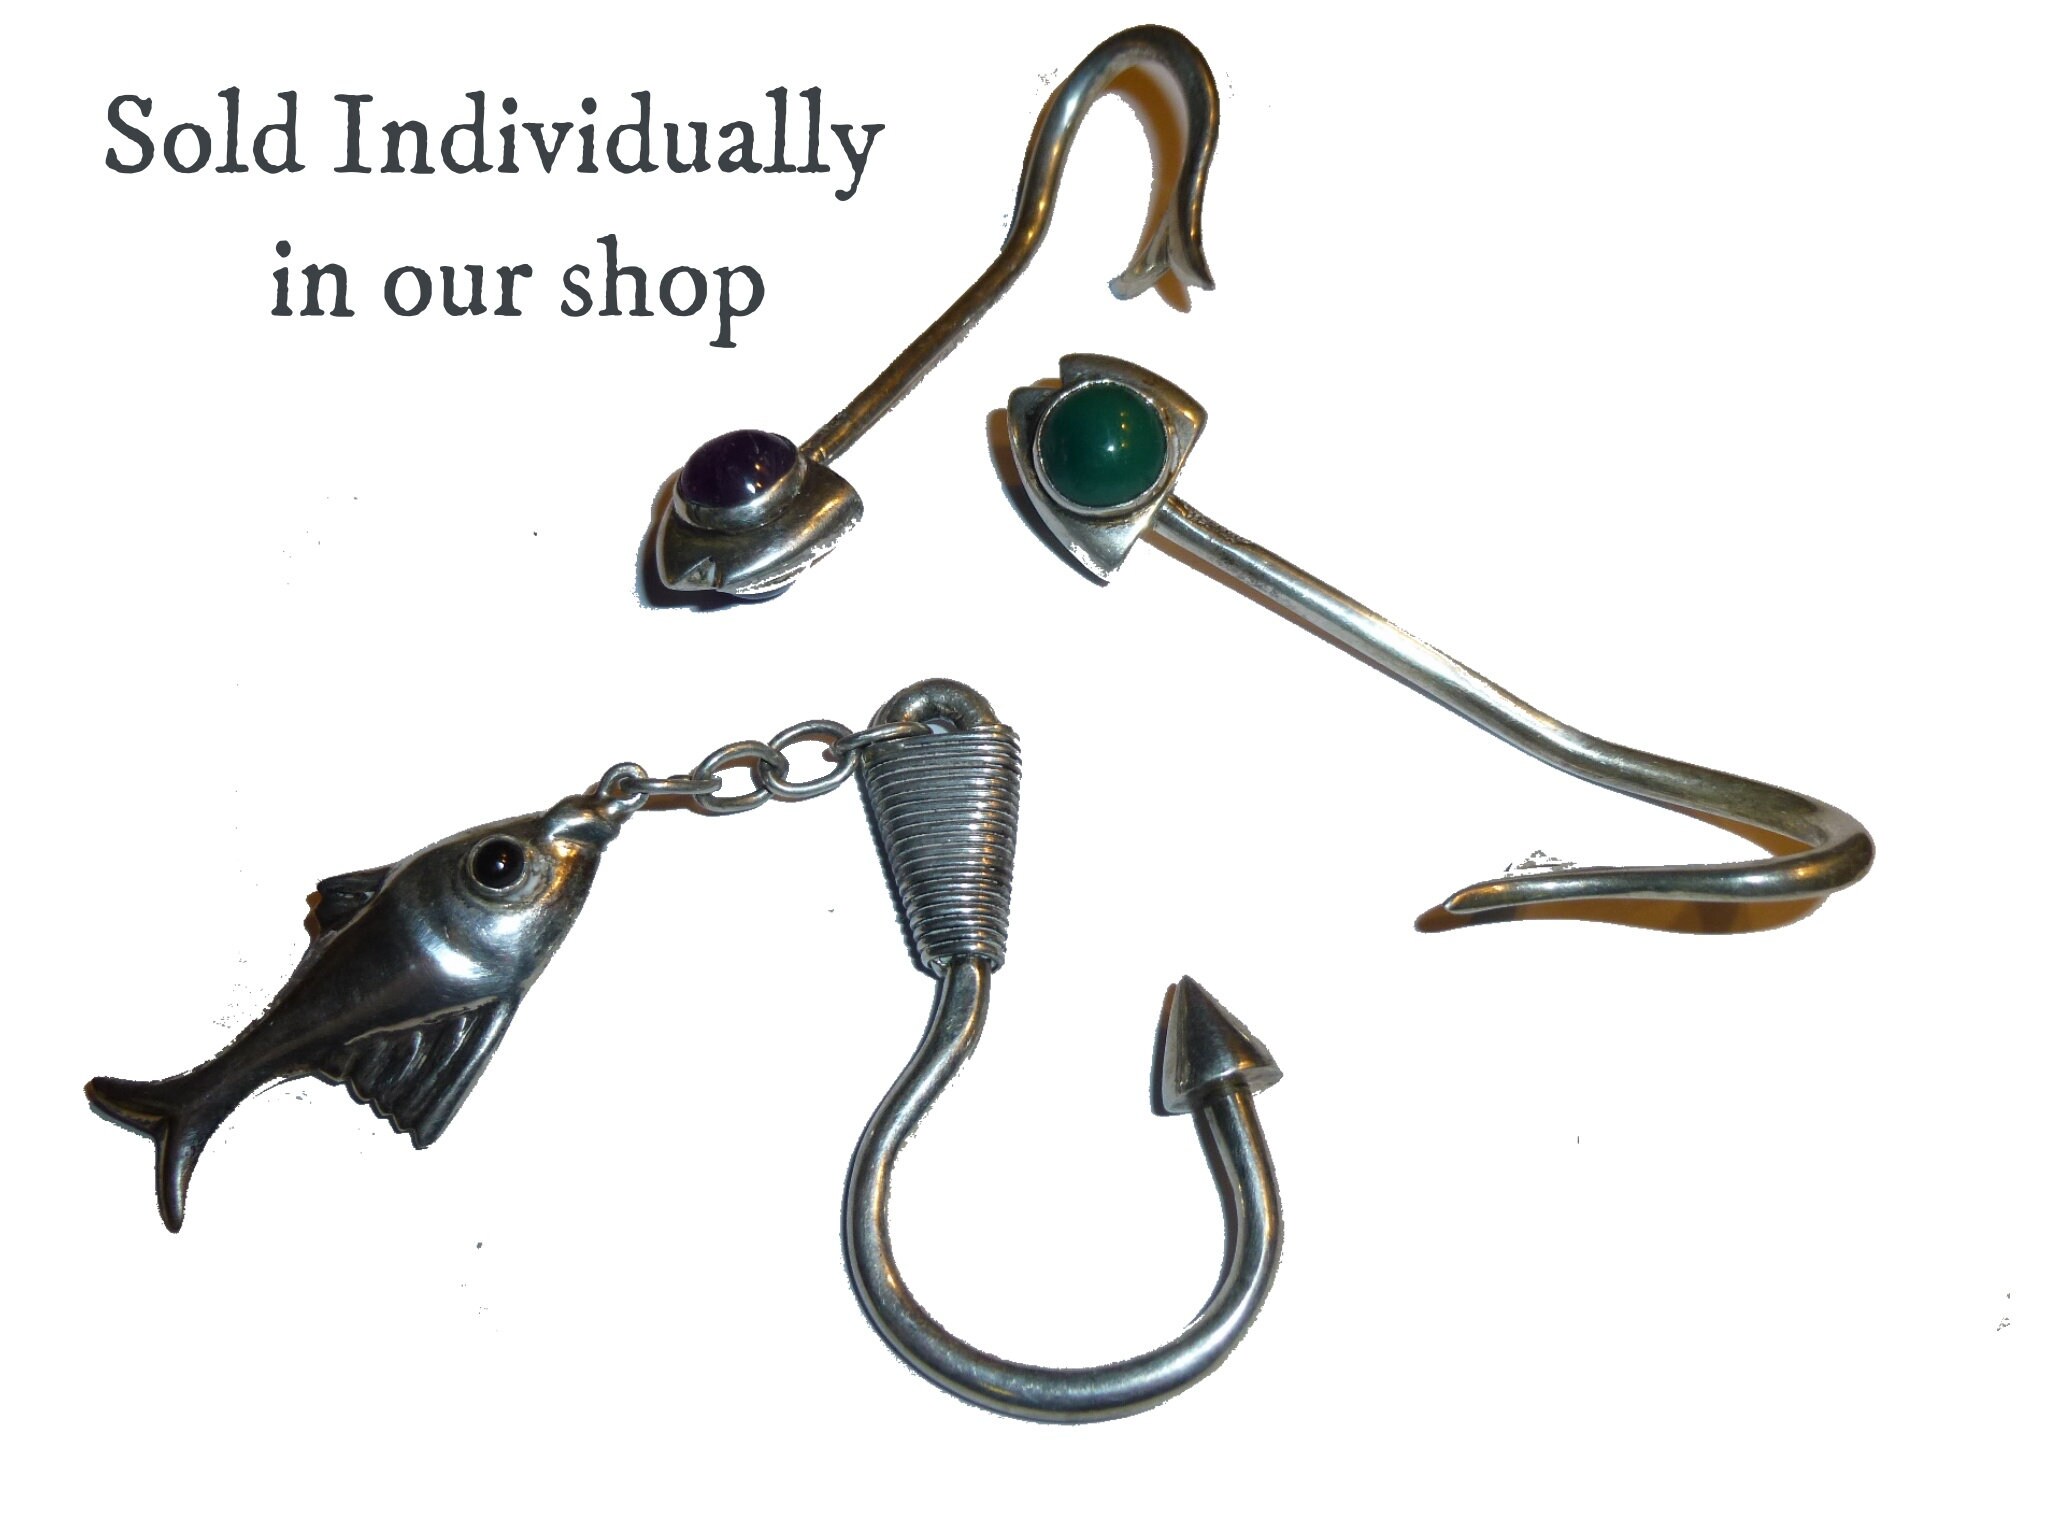 YOU CHOOSE Sterling Mexico 1950s Sterling Silver Unusual Fish Key Chain Accessoires Sleutelhangers & Keycords Sleutelhangers Use as a Pendant Taxco Attributed to Hubert Harmon Design 